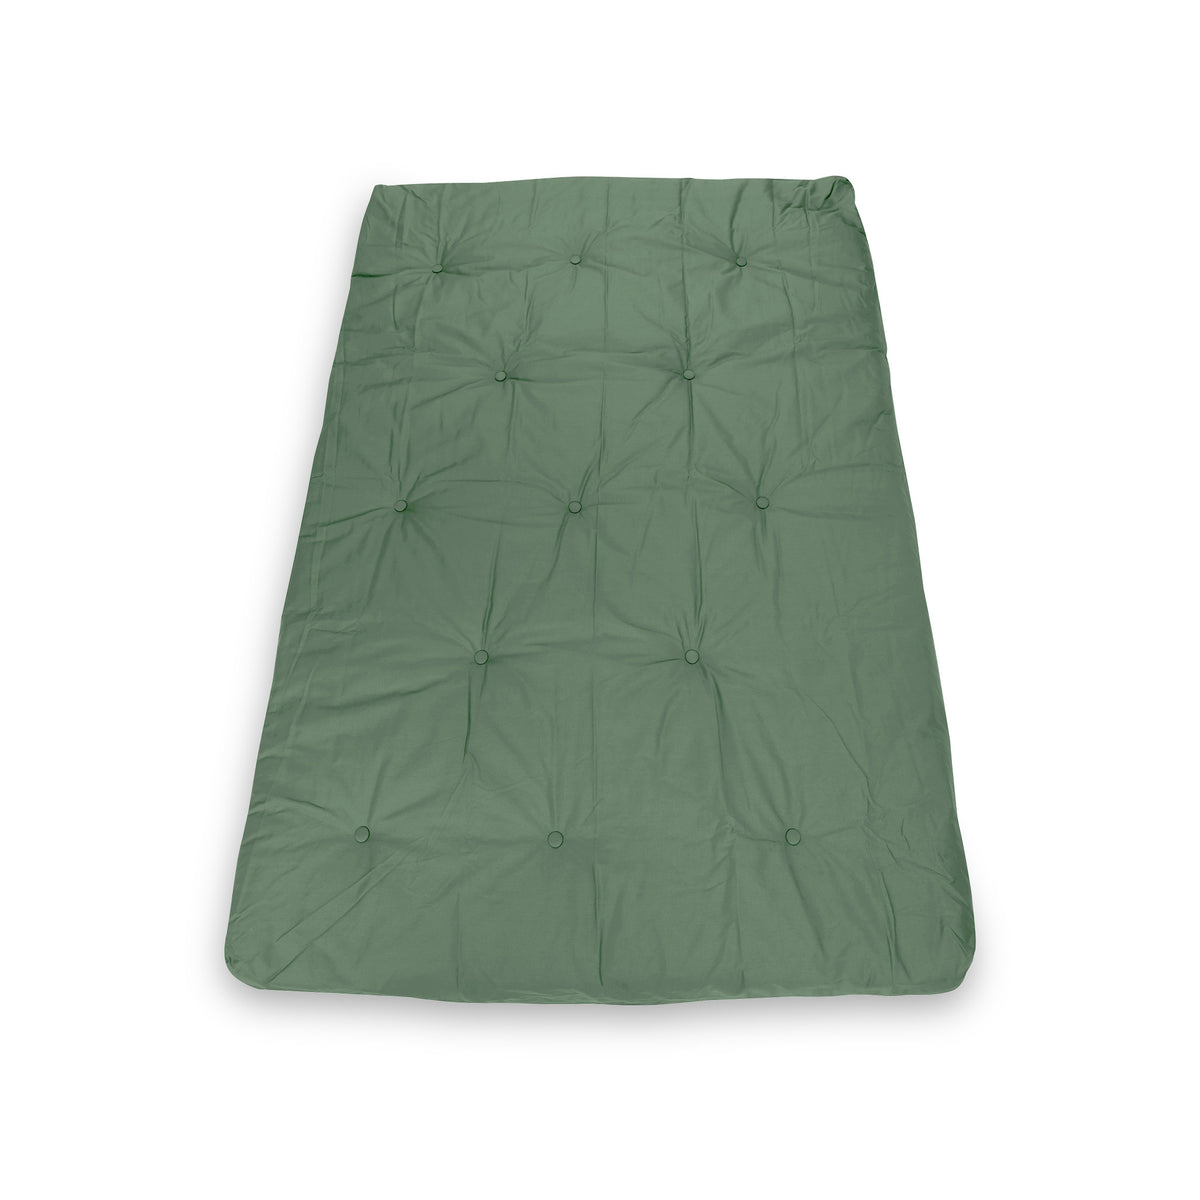 Maggie Double Futon Harmony Green Mattress from Roseland Furniture